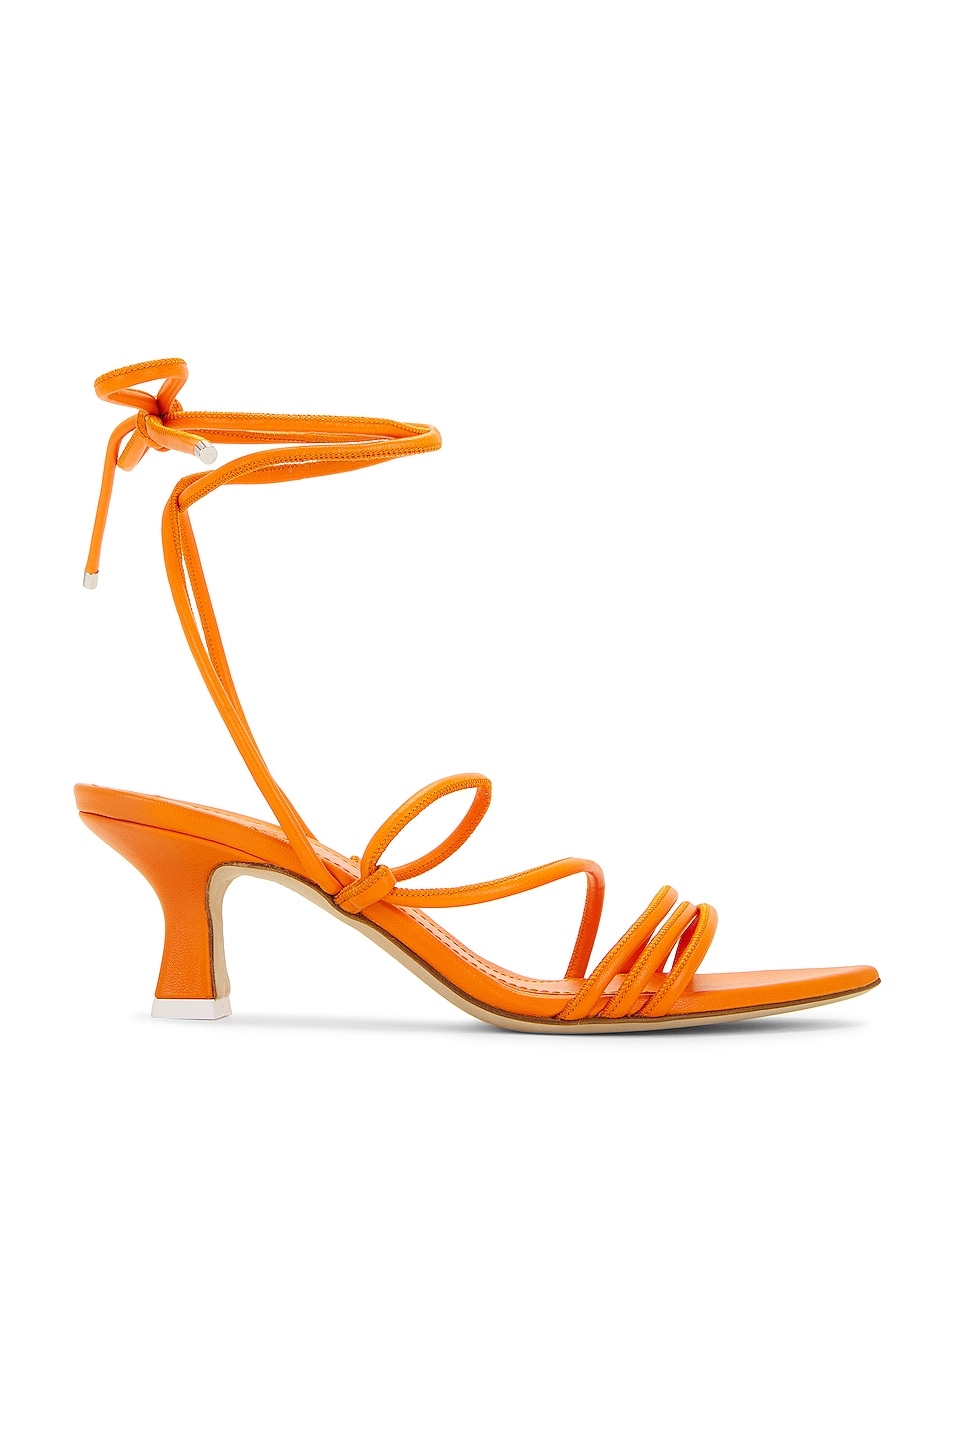 Orange strappy sandals with lace up detail